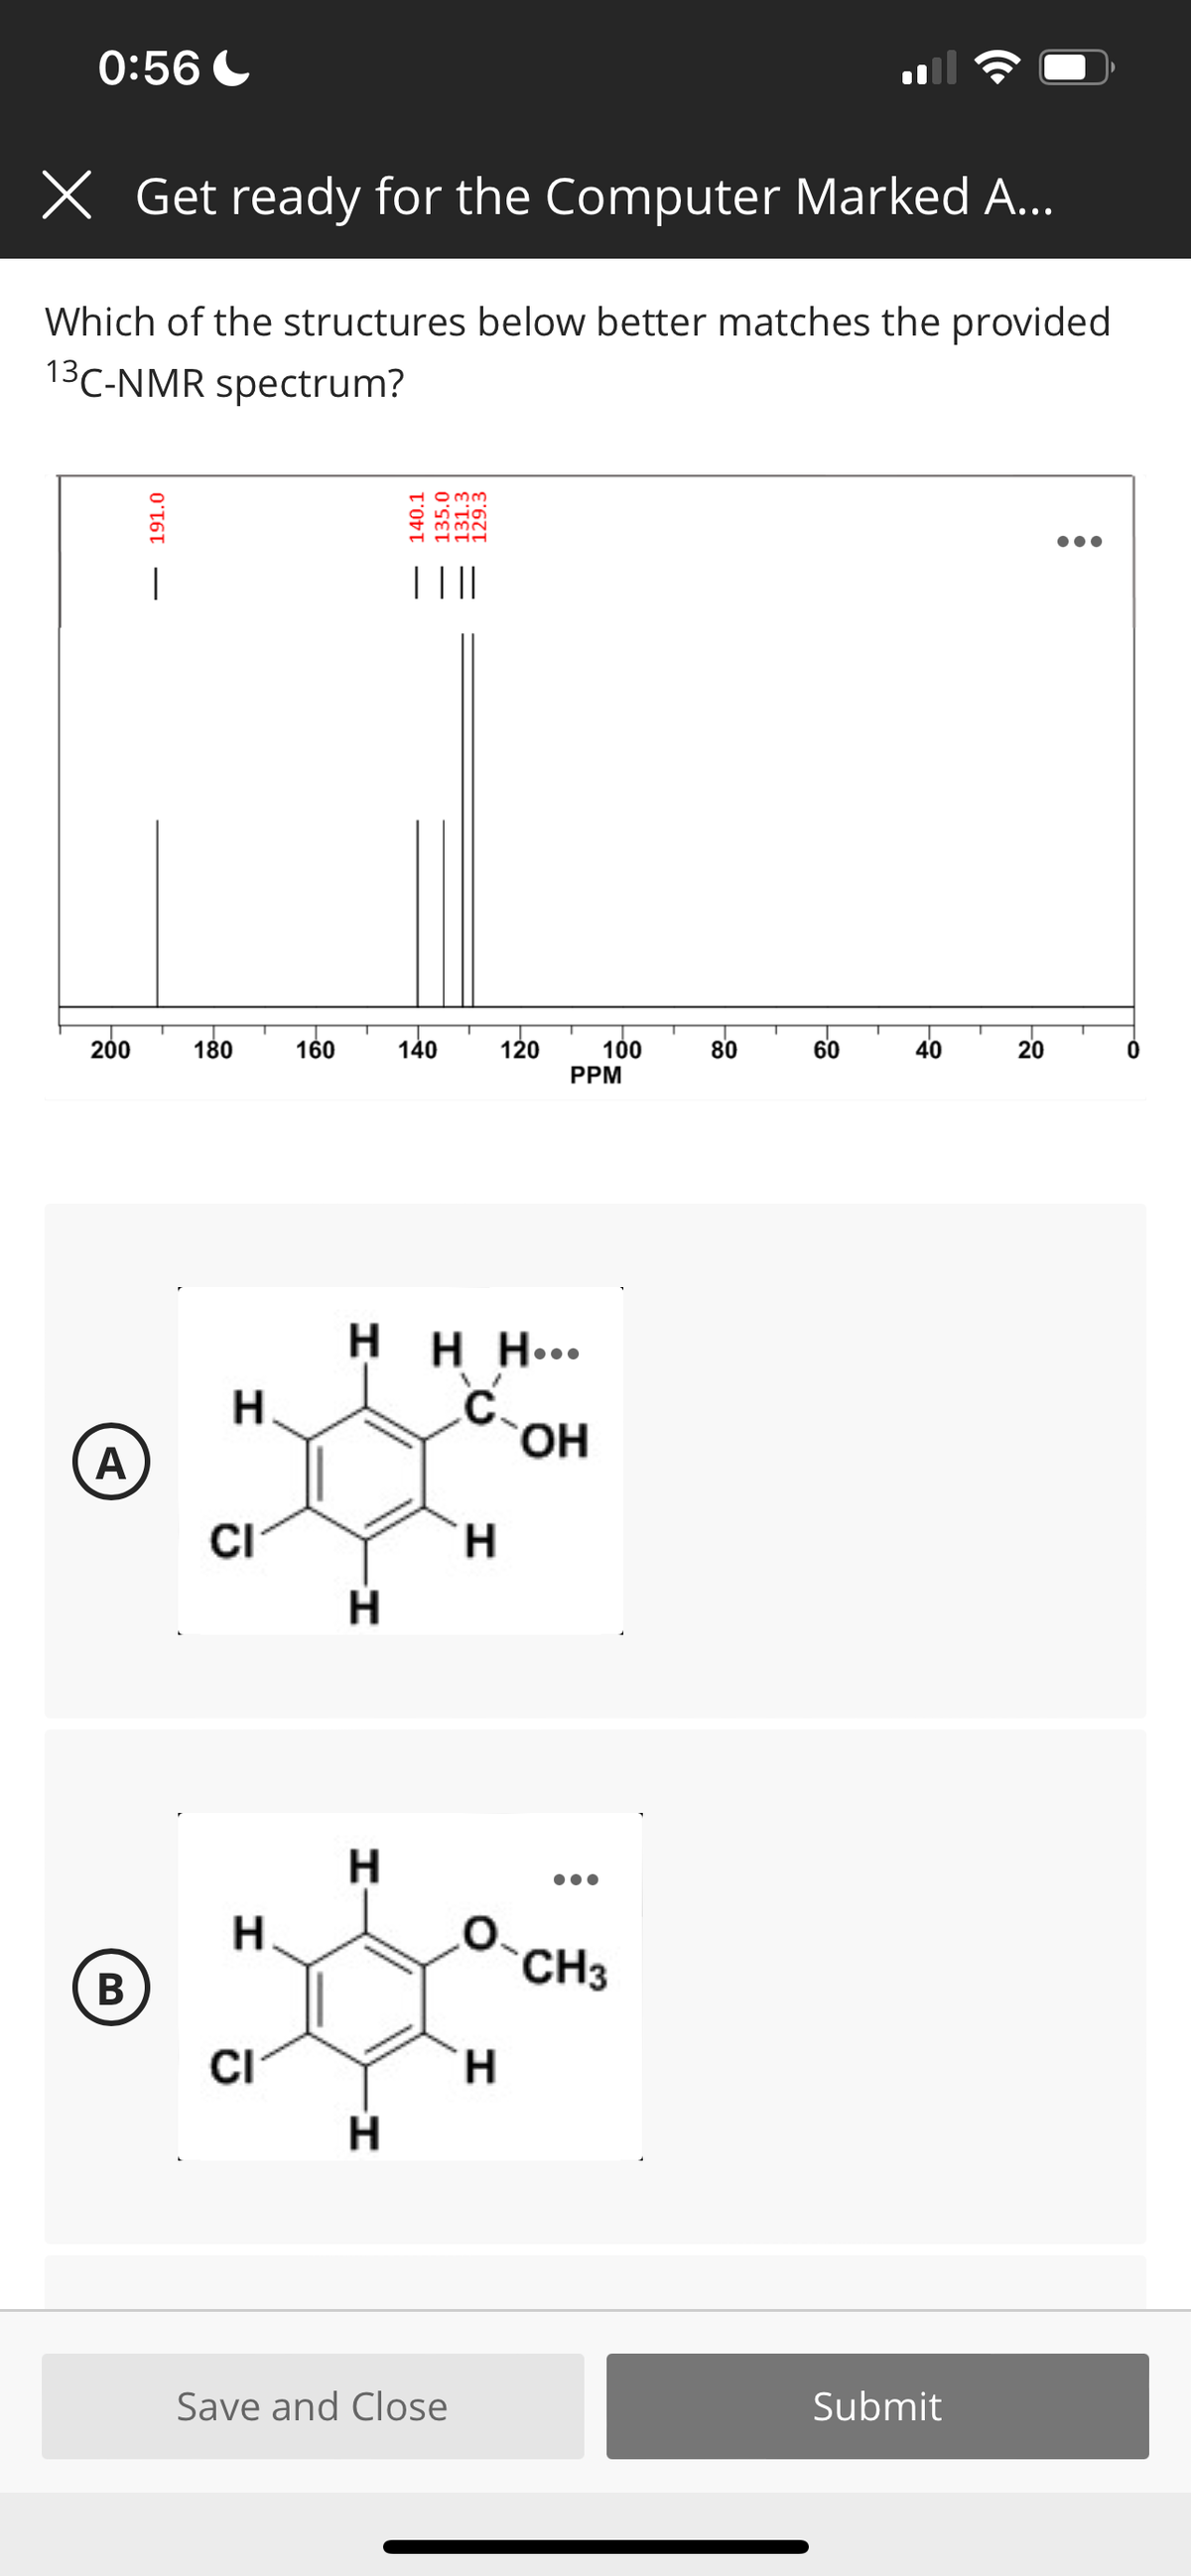 0:56 C
X Get ready for the Computer Marked A...
Which of the structures below better matches the provided
13C-NMR spectrum?
T ||
200
180
160
140
120
100
PPM
80
60
40
20
H H H...
C.
HO,
CI
H.
H.
H.
O.
CH3
В
CI
H.
Save and Close
Submit
191.0
140.1
135.0
